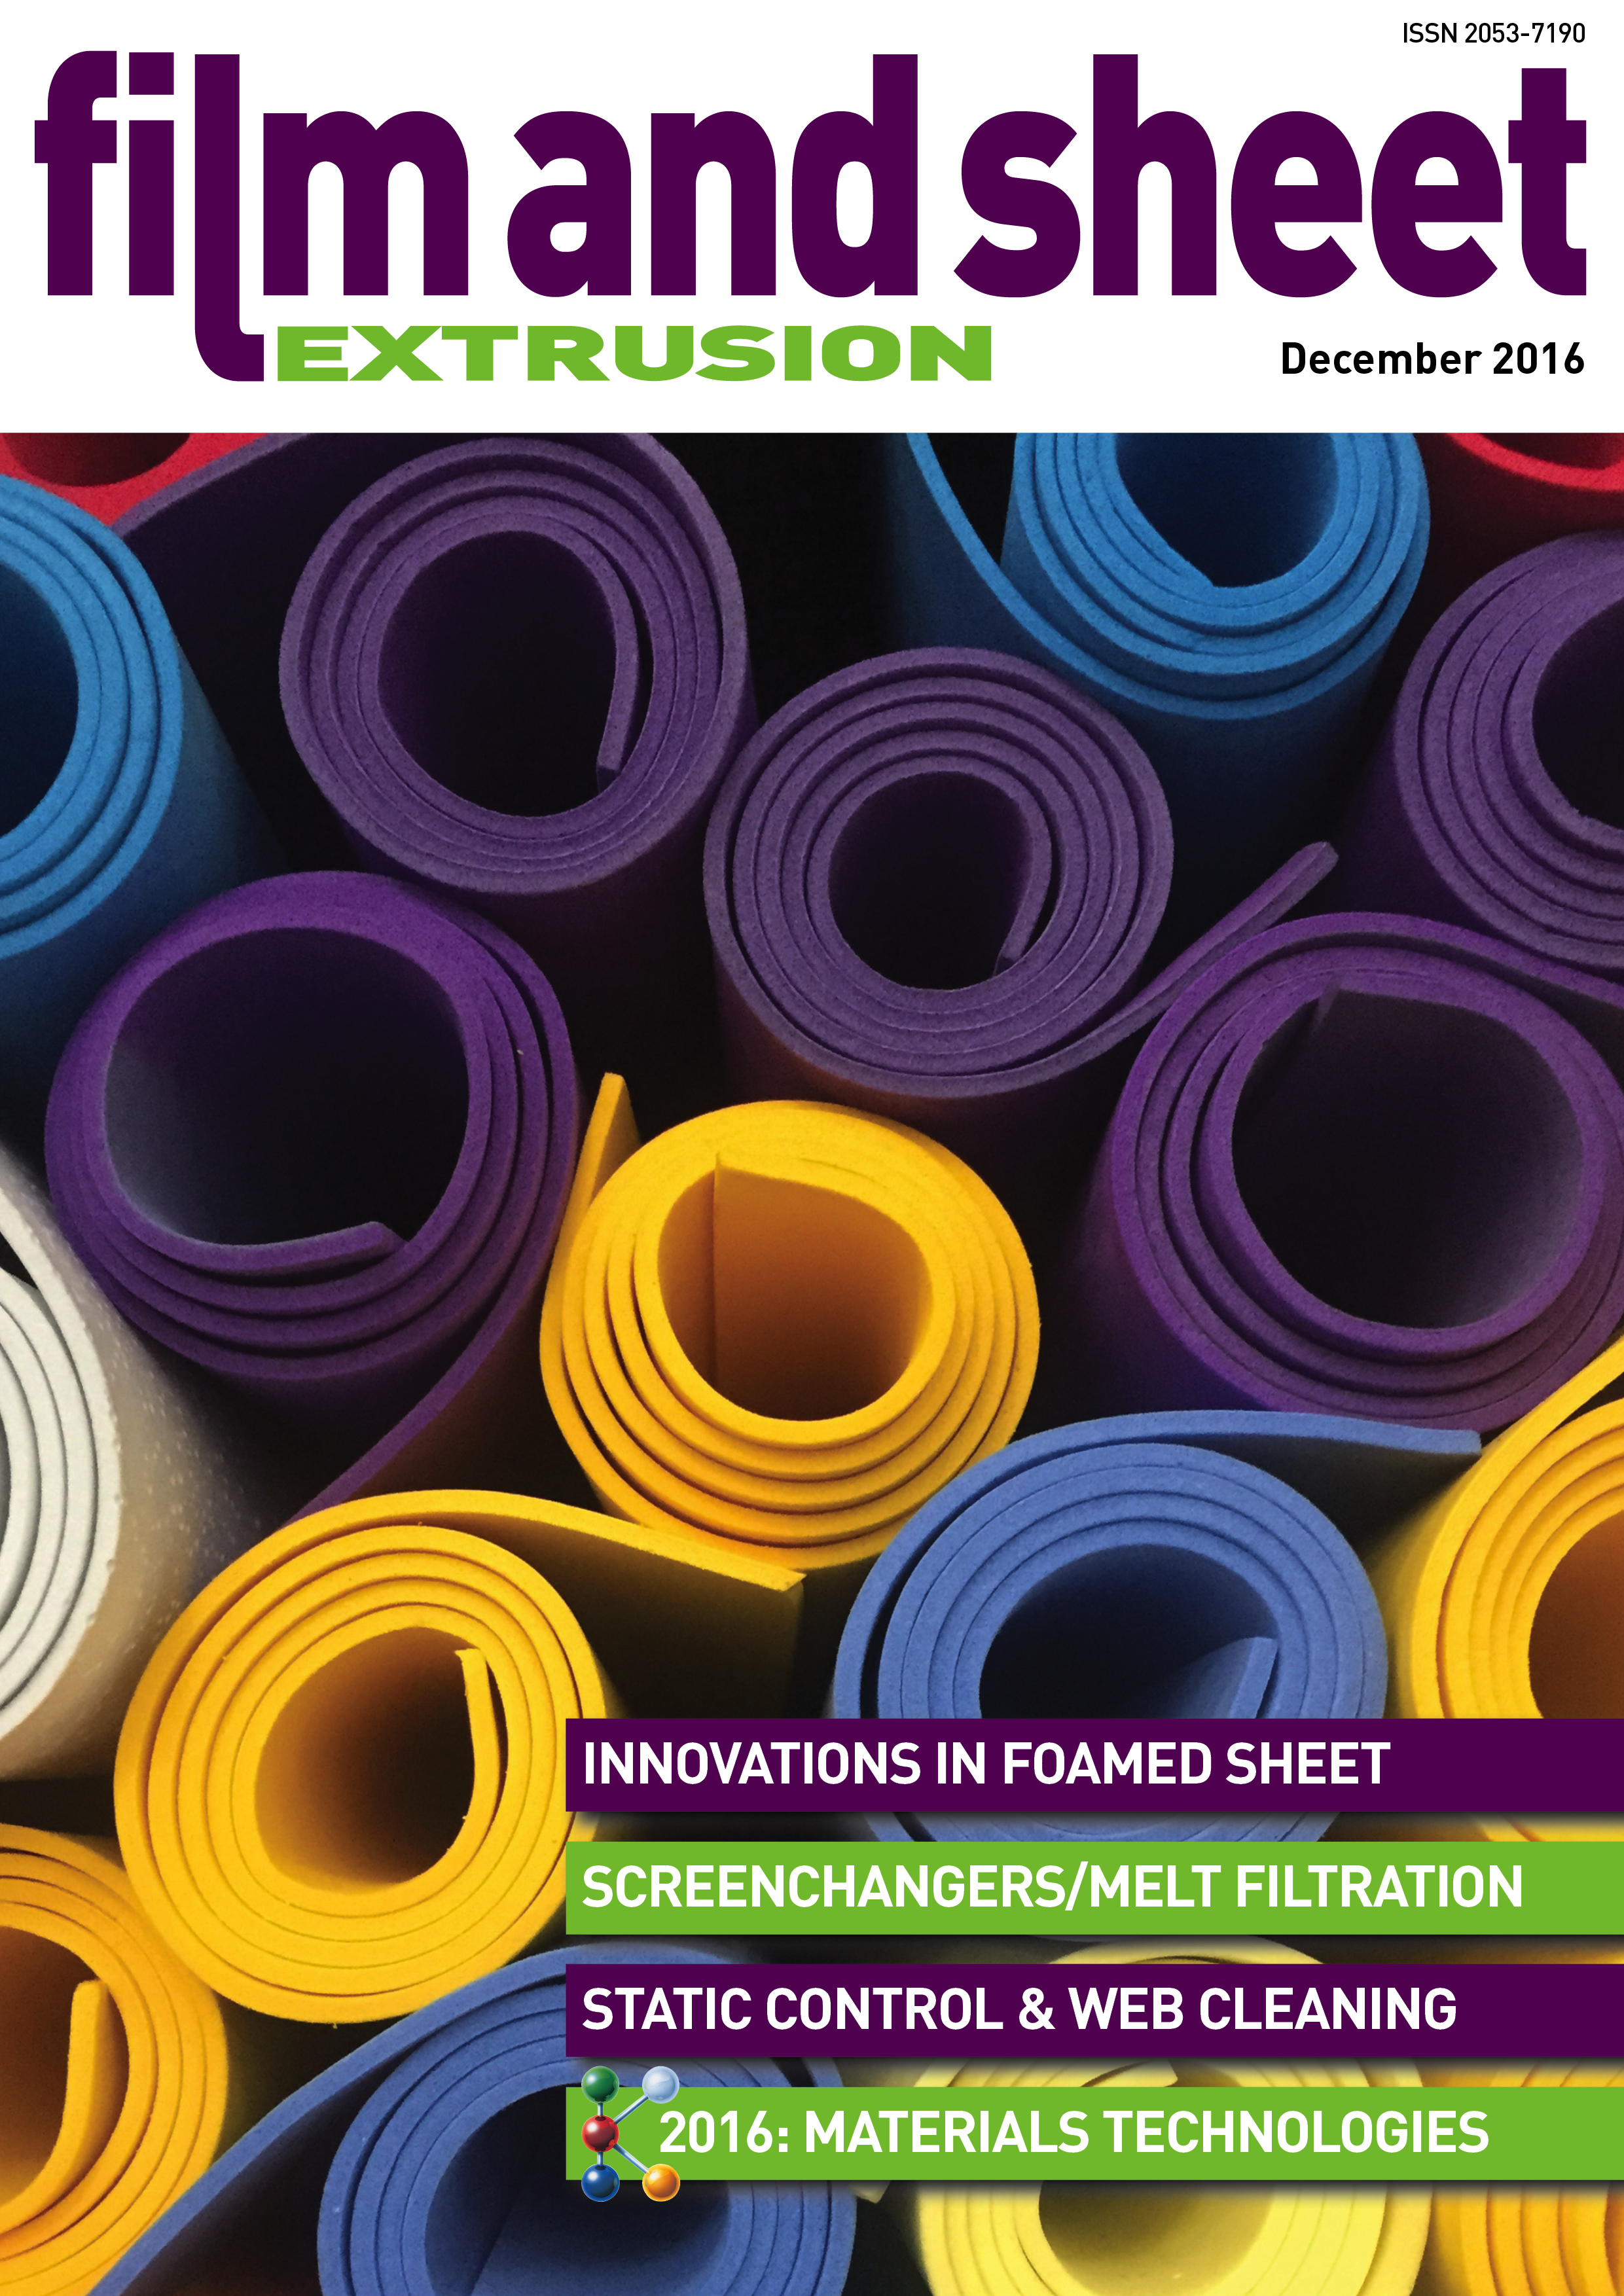 Film and Sheet Extrusion December 2016